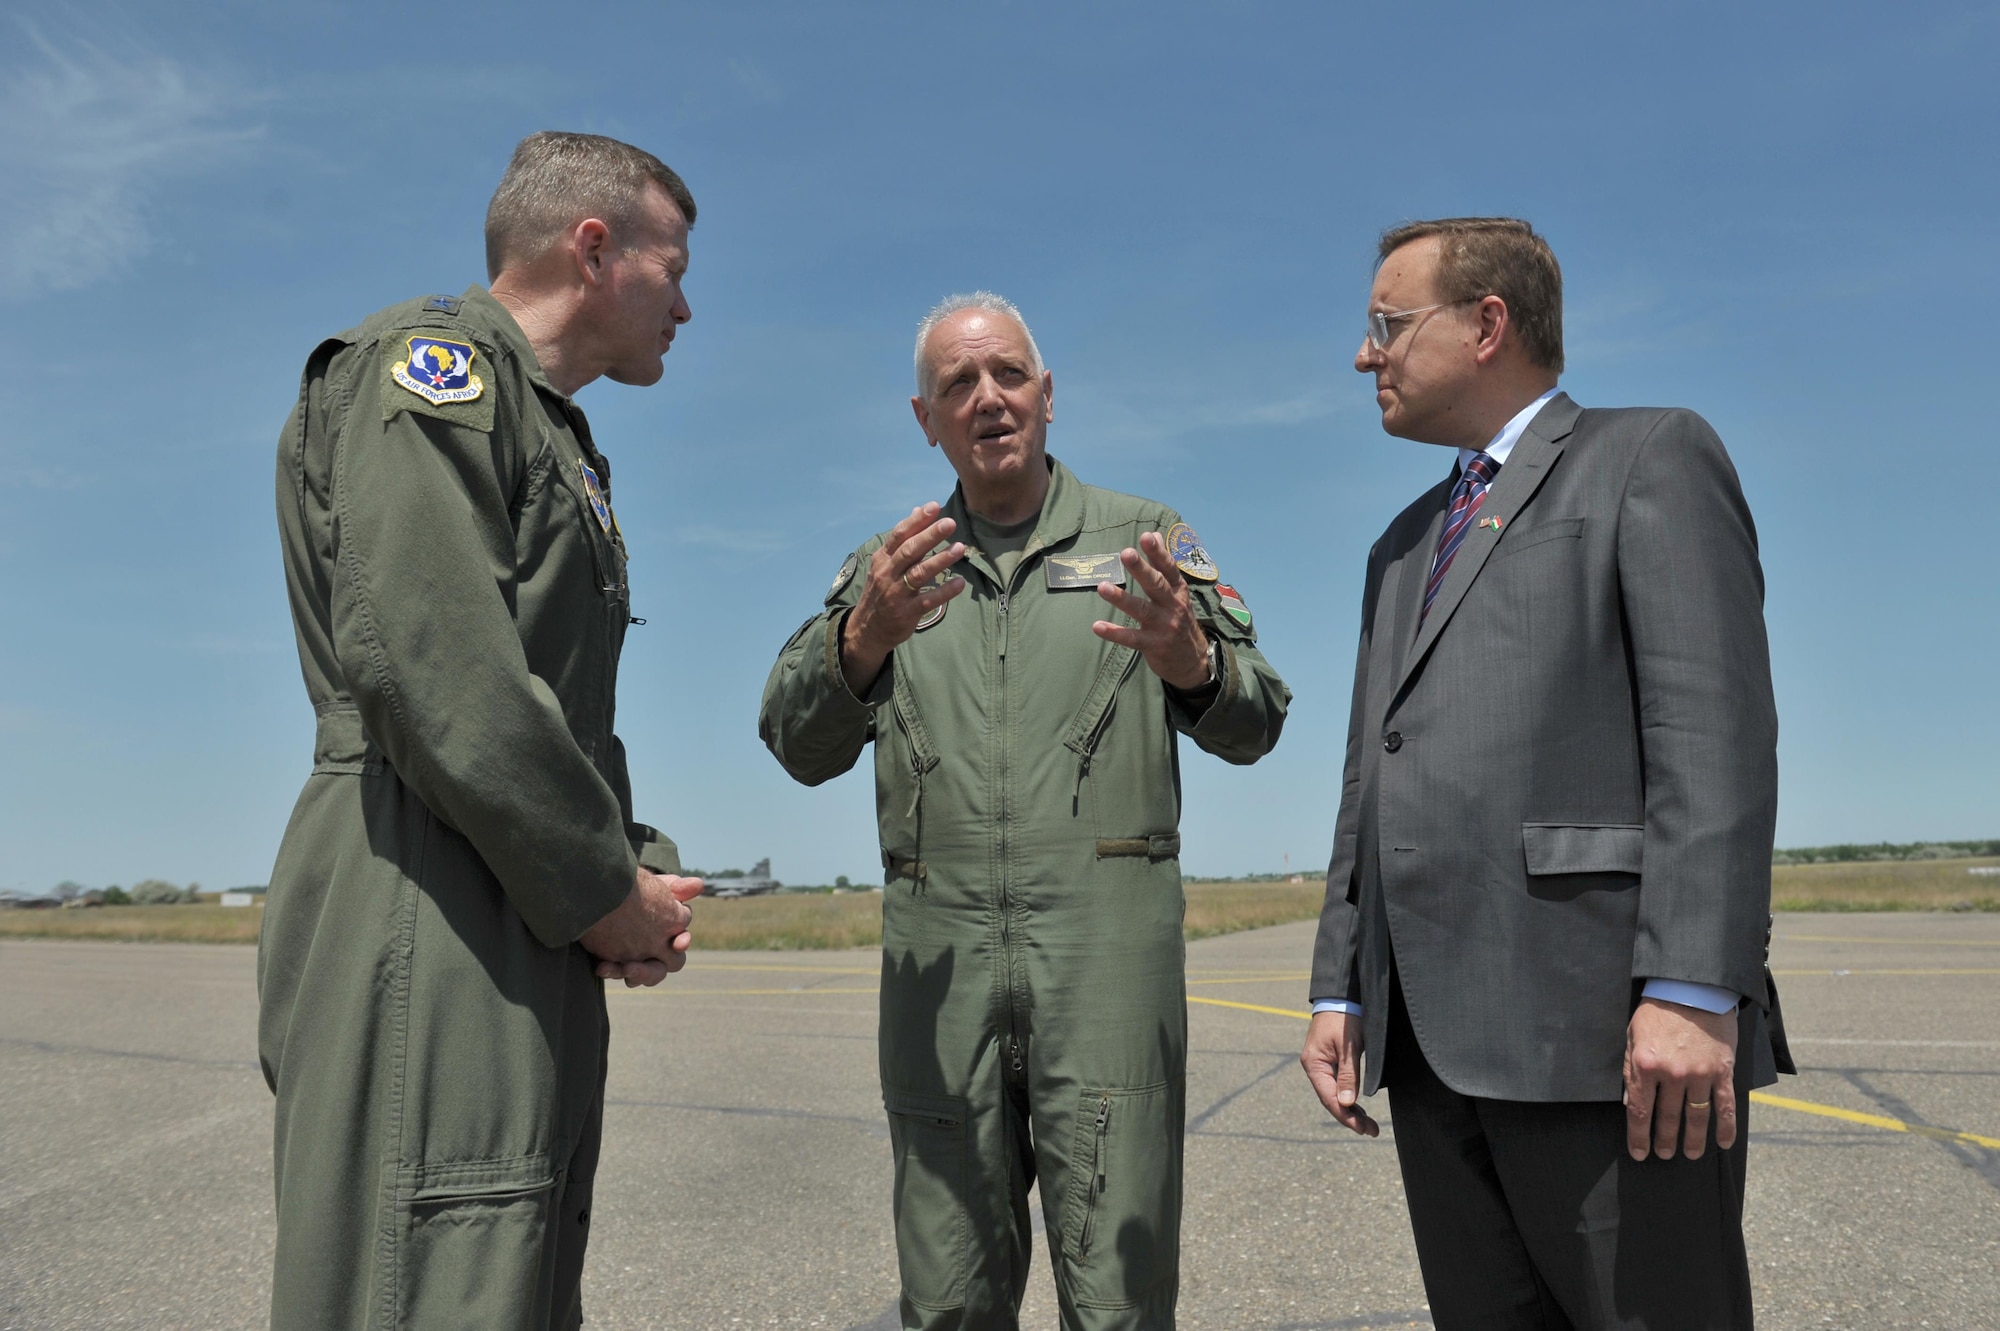 Lt. Gen. Zoltan Orosz, PhD., deputy chief of defence for the Hungarian Defence Forces, and Mr. David Kostelancik, chargé d’ affaires for the U.S. Embassy in Hungary, welcome Gen. Tod Wolters, commander of the United States Air Forces in Europe and Air Forces Africa, to the 59th Air Base in Kecskemét, Hungary, on June 2, for a Distinguished Visitor Day event during Exercise Load Diffuser. The exercise, which kicked off on Monday, May 22 and will conclude June 9, is the first Load Diffuser Exercise in Hungary in seven years and only the third of its kind in the two-decade partnership between Hungary and the Ohio National Guard.